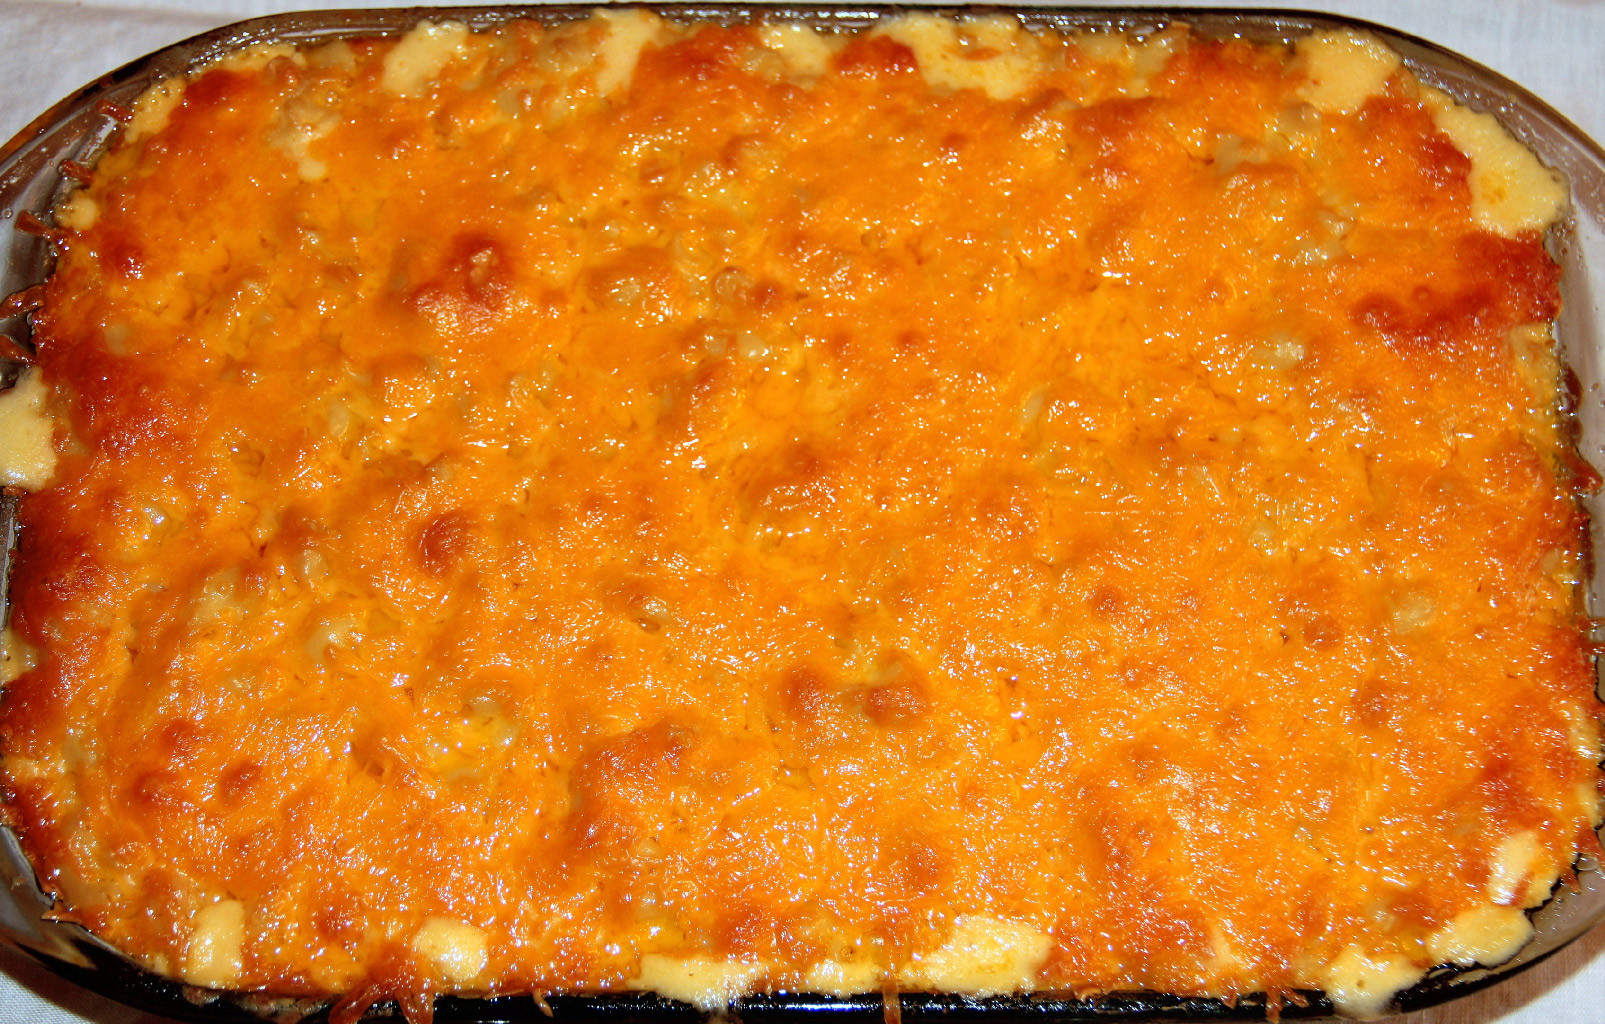 Best Macaroni And Cheese Recipe Baked
 Baked Macaroni and Cheese The Best